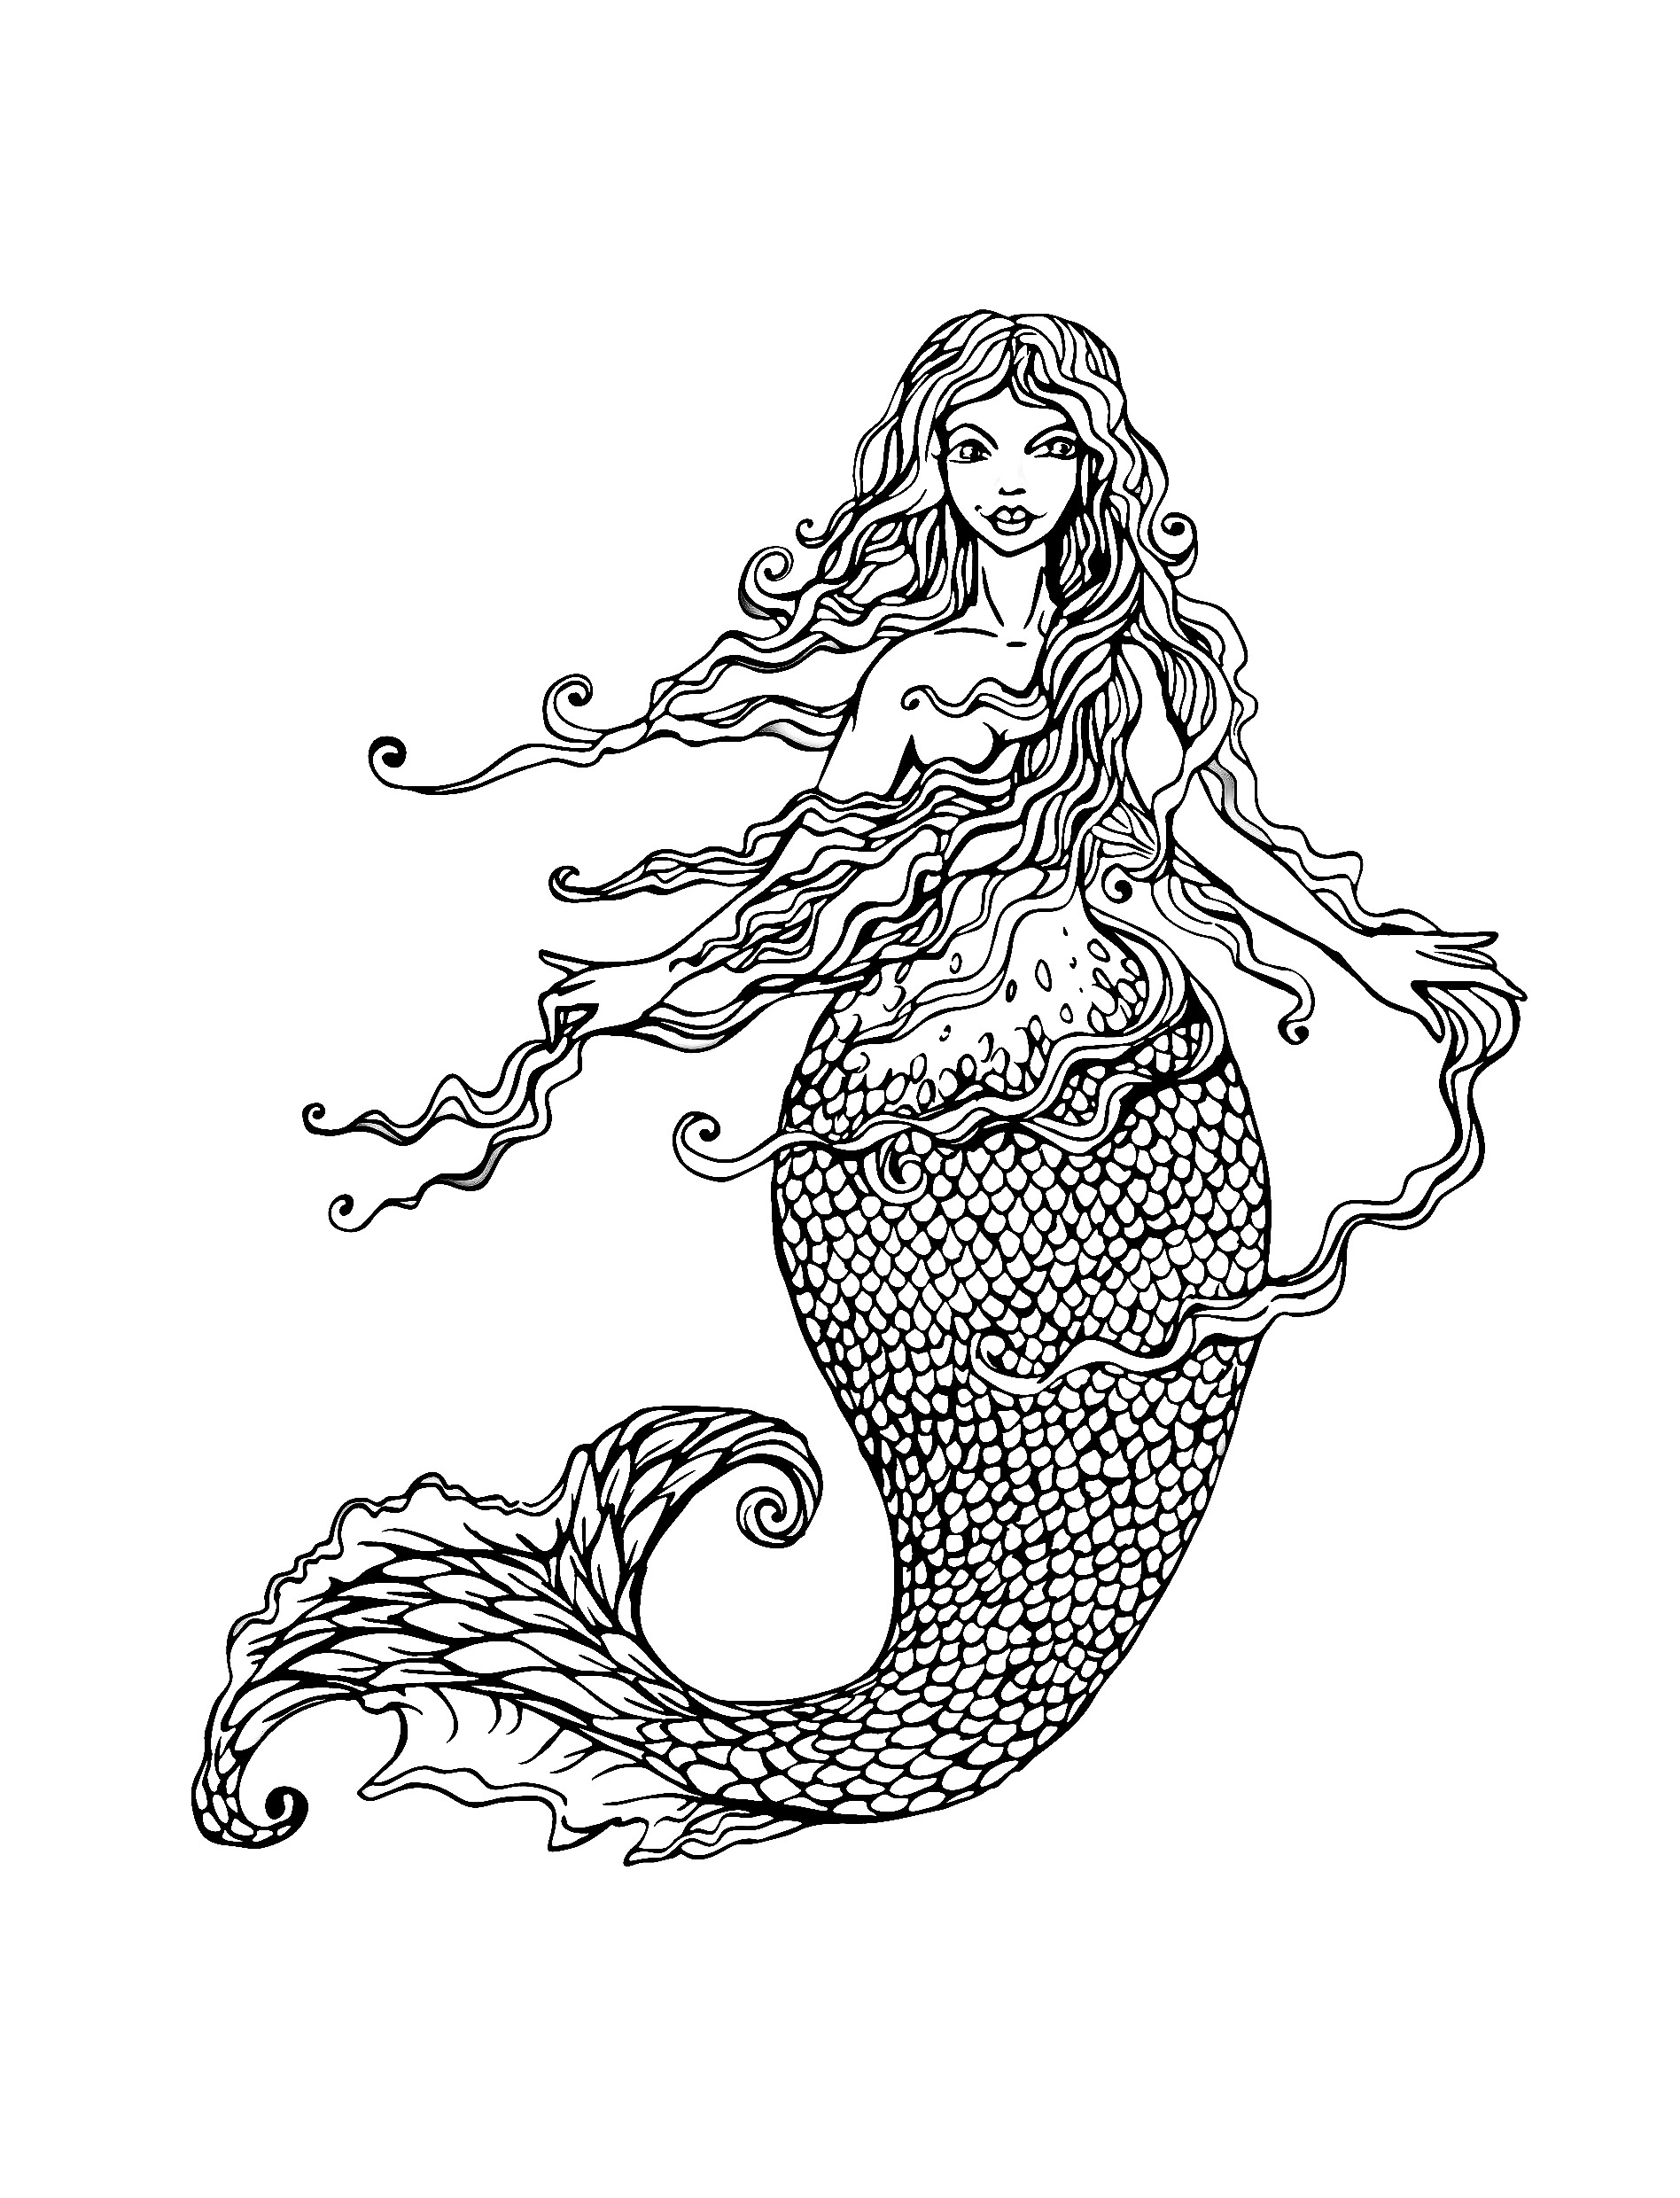 Mermaid Coloring Pages for Adults - Best Coloring Pages ...